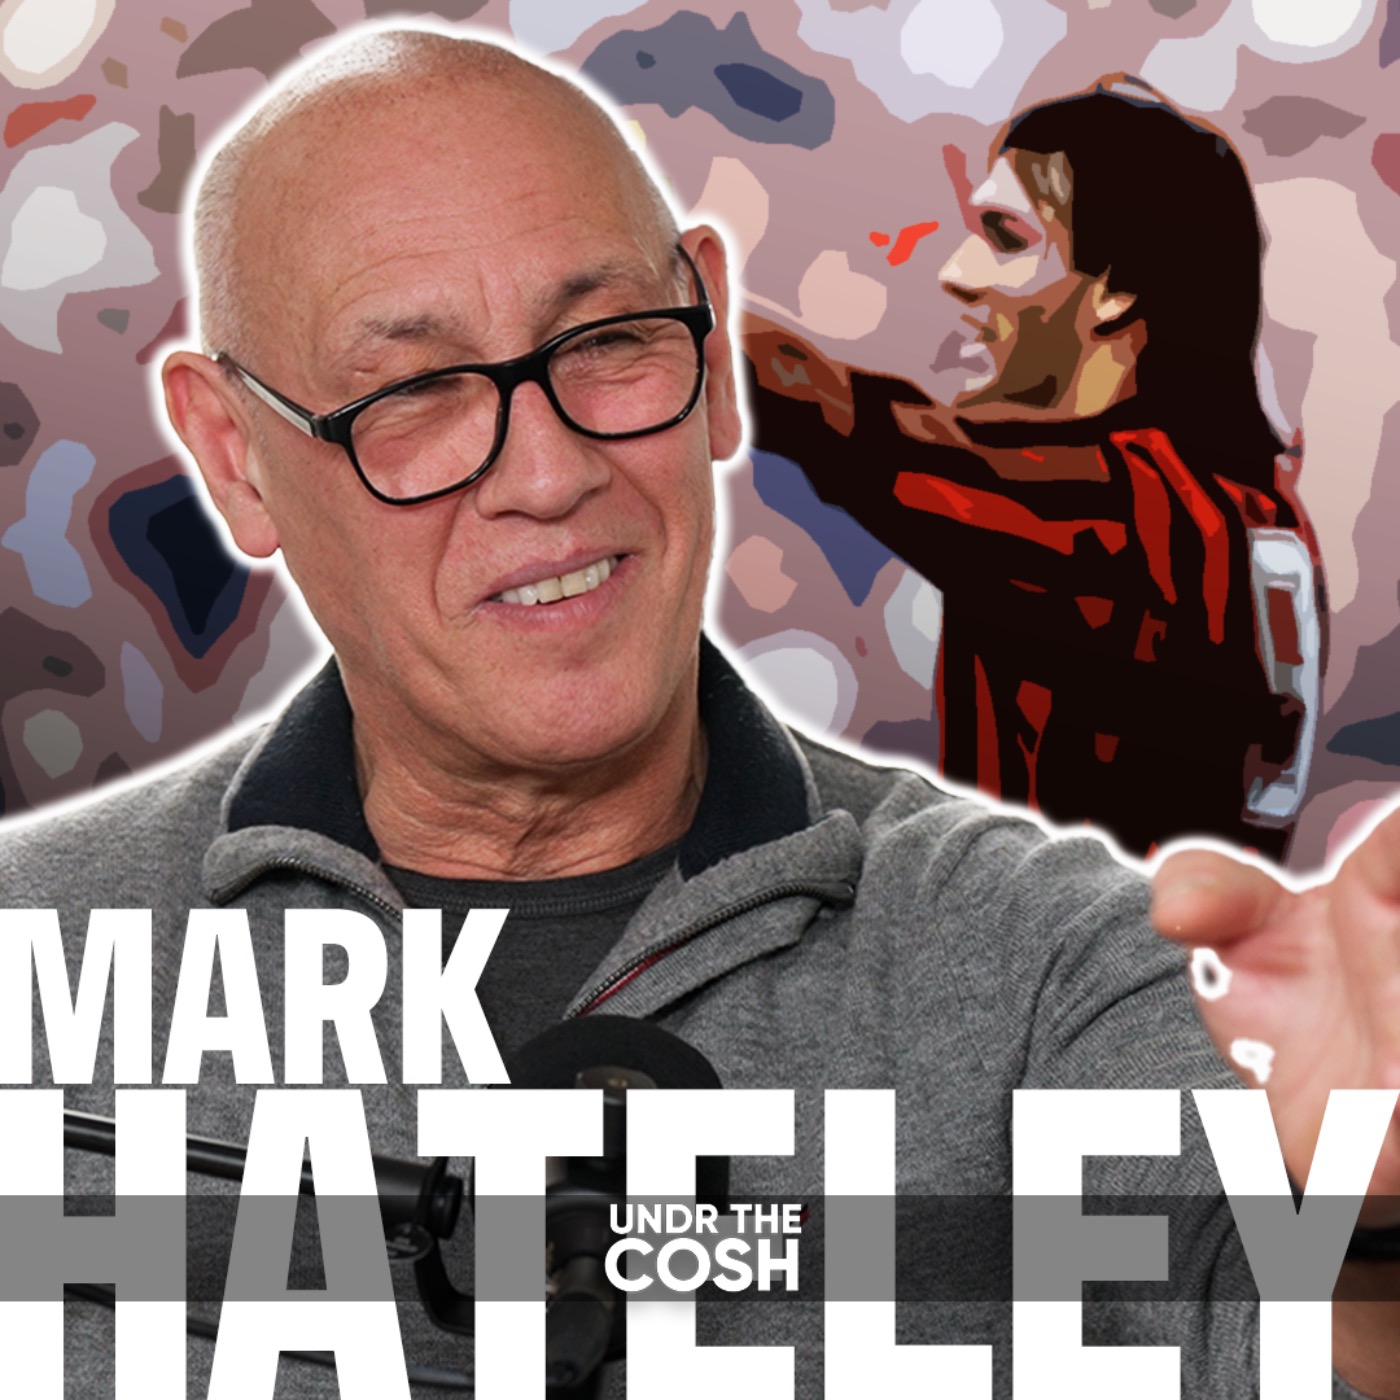 Mark Hateley | You'll Never Make A Player